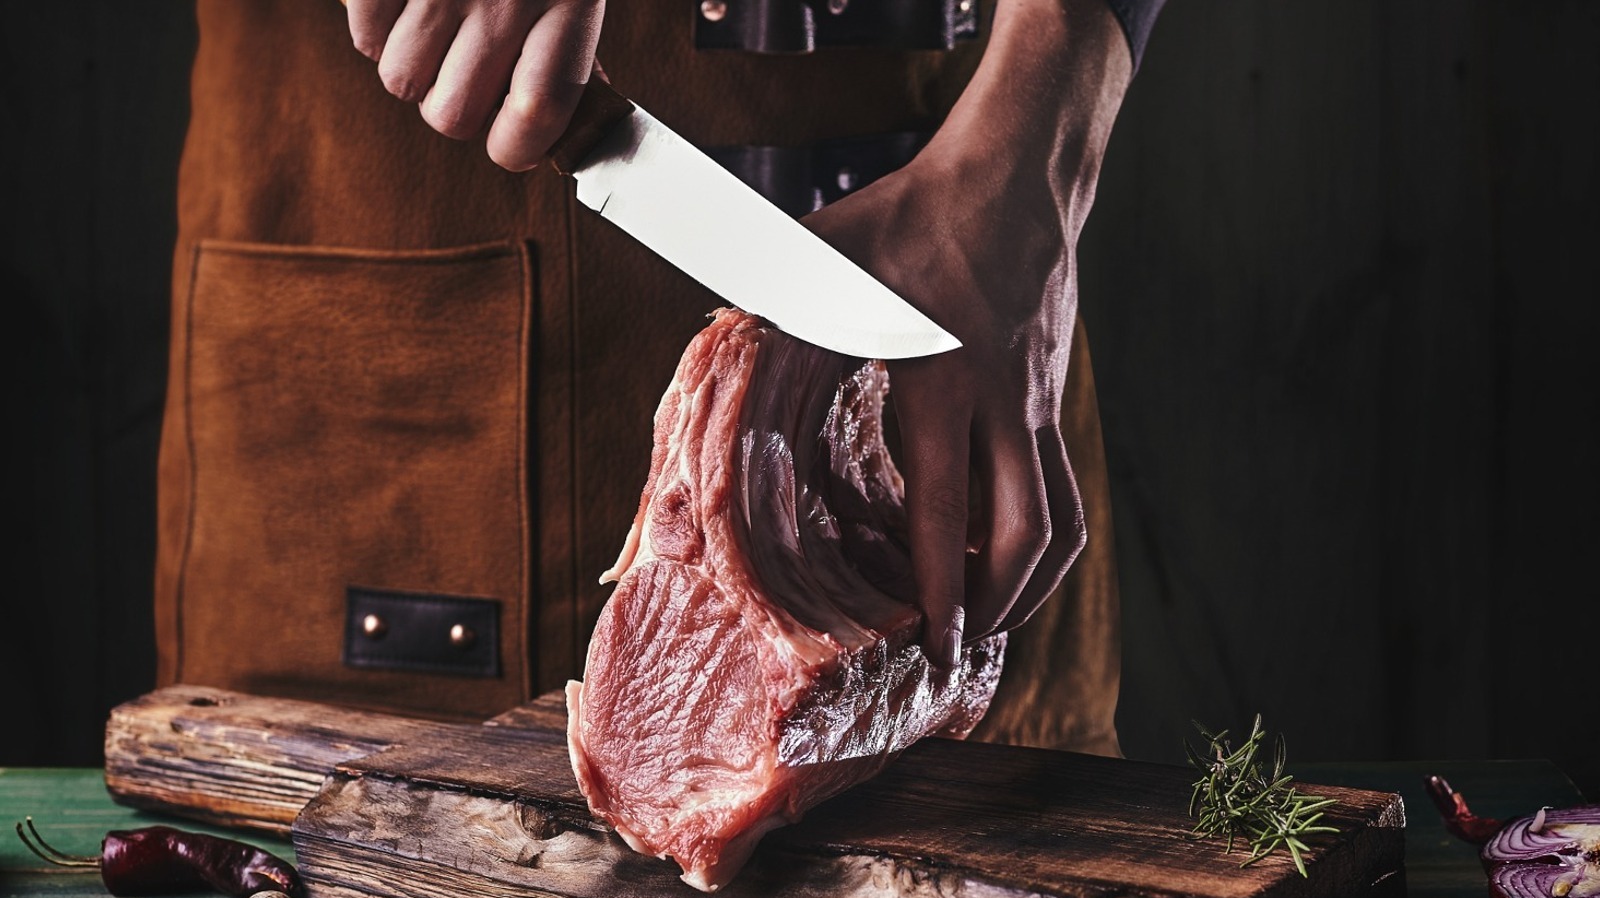 https://www.tastingtable.com/img/gallery/slicing-through-bone-with-chefs-knives-is-always-a-mistake/l-intro-1687884832.jpg